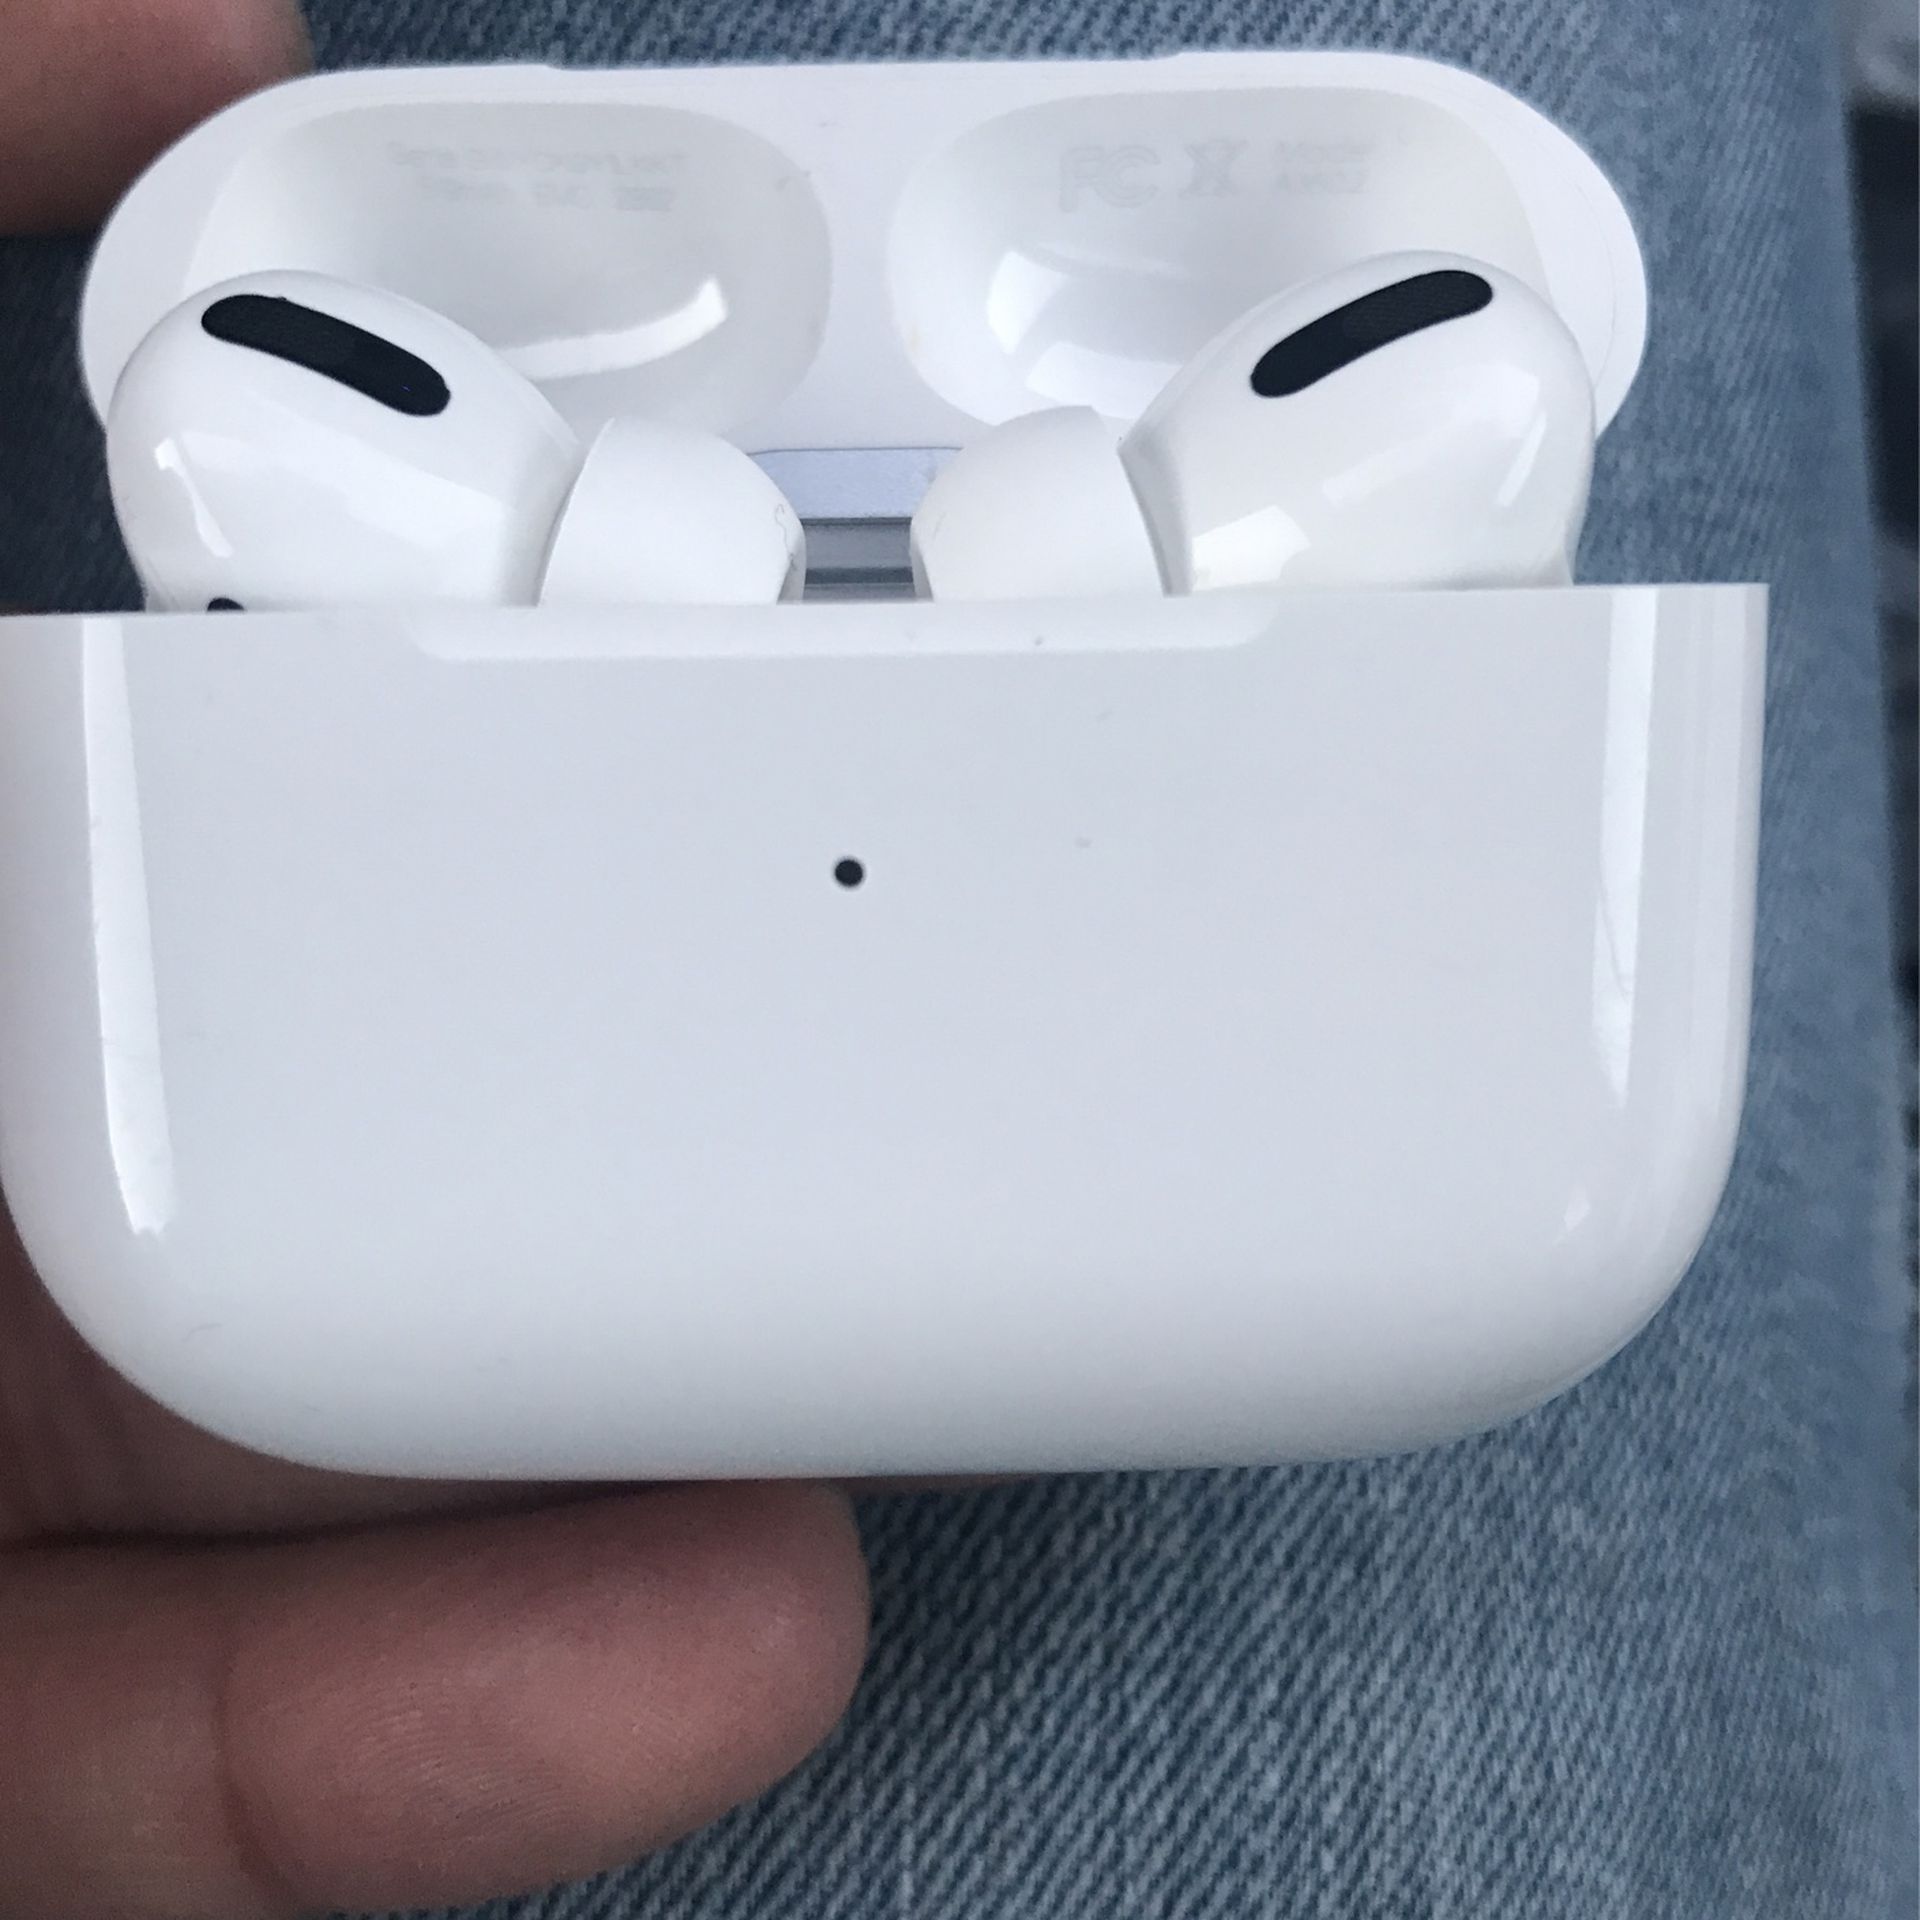 AirPod Pro Sale Today